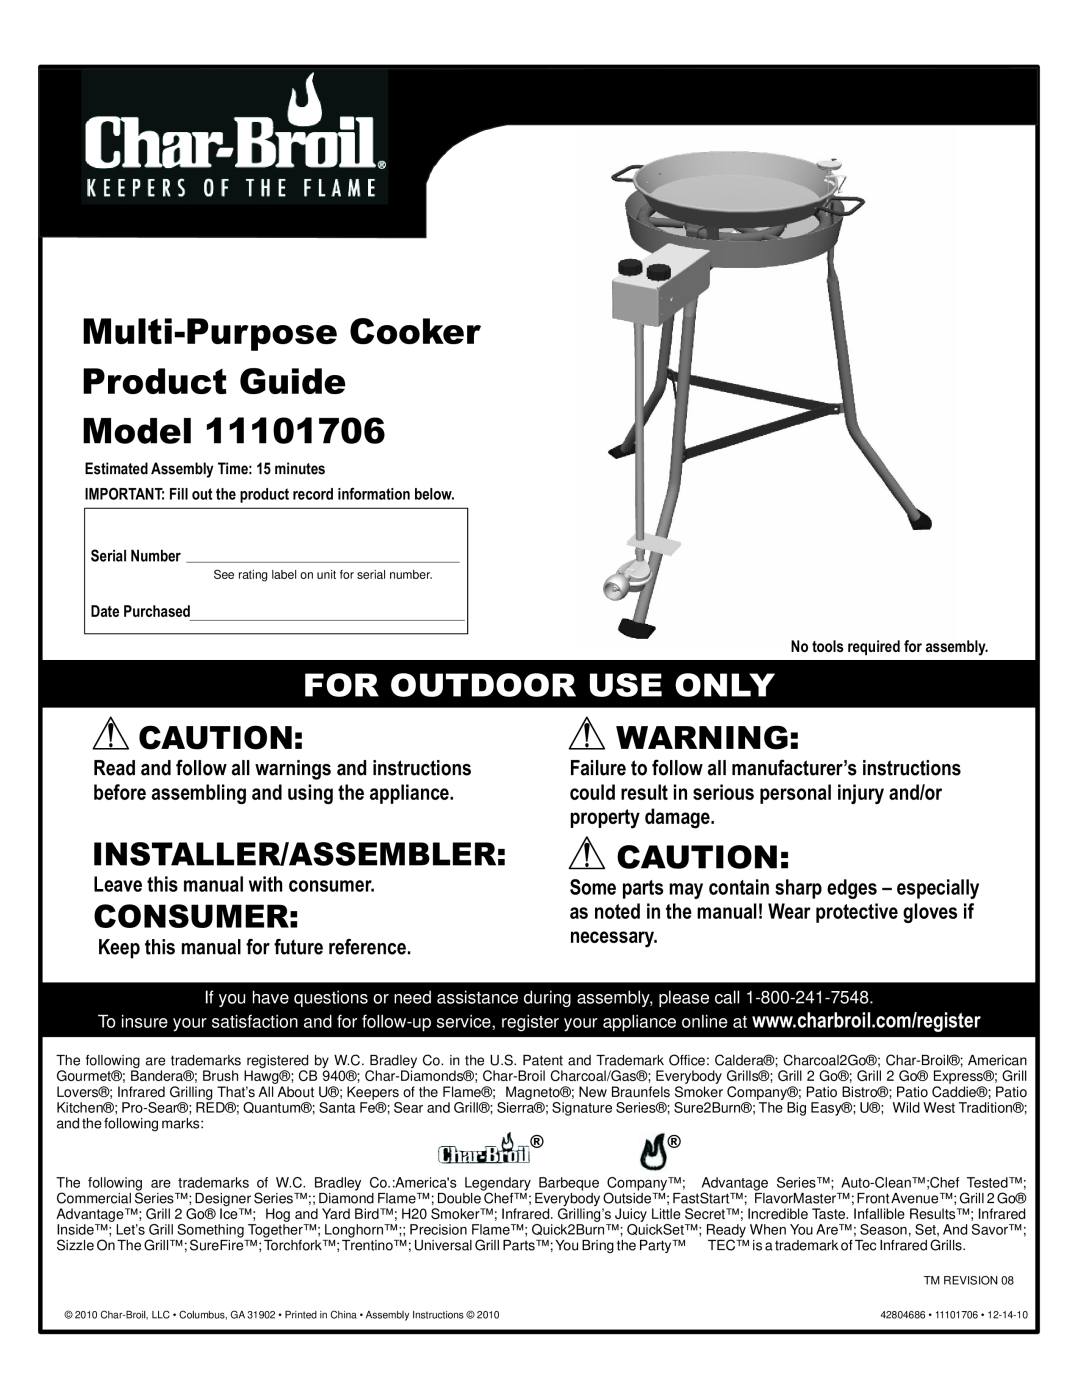 Char-Broil 11101706 manual Leave this manual with consumer, Keep this manual for future reference, For Outdoor Use Only 